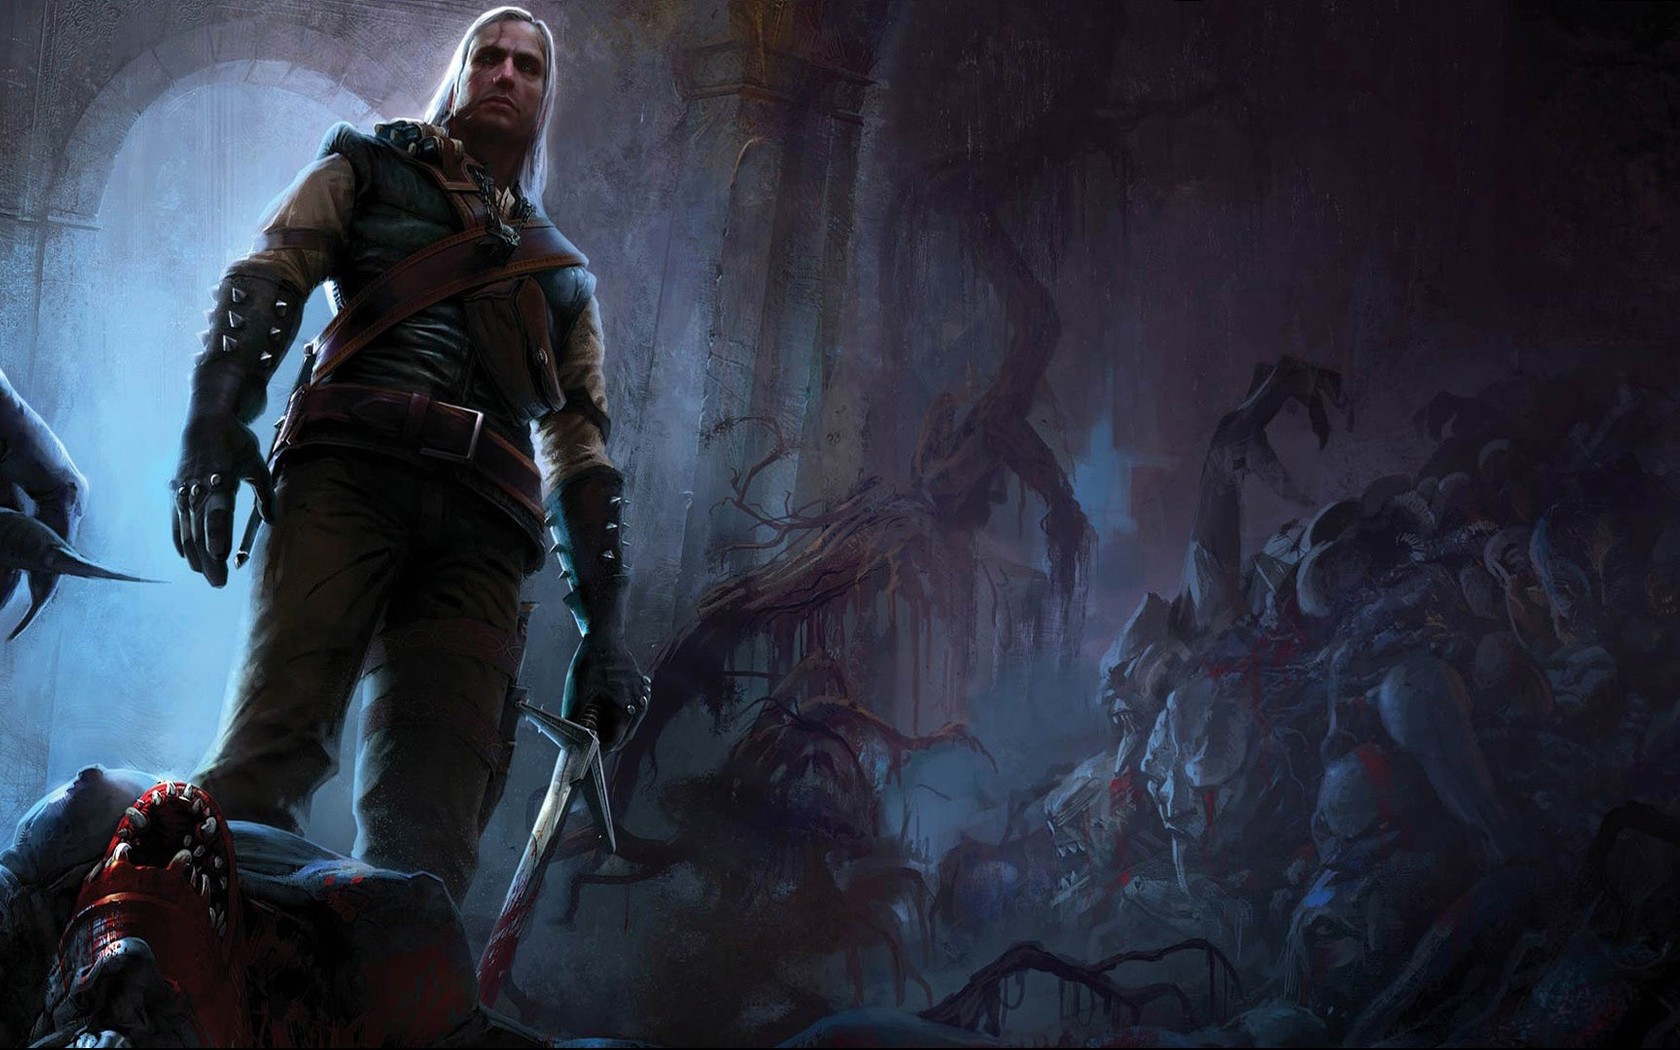 Download The Witcher wallpaper 1680x1050